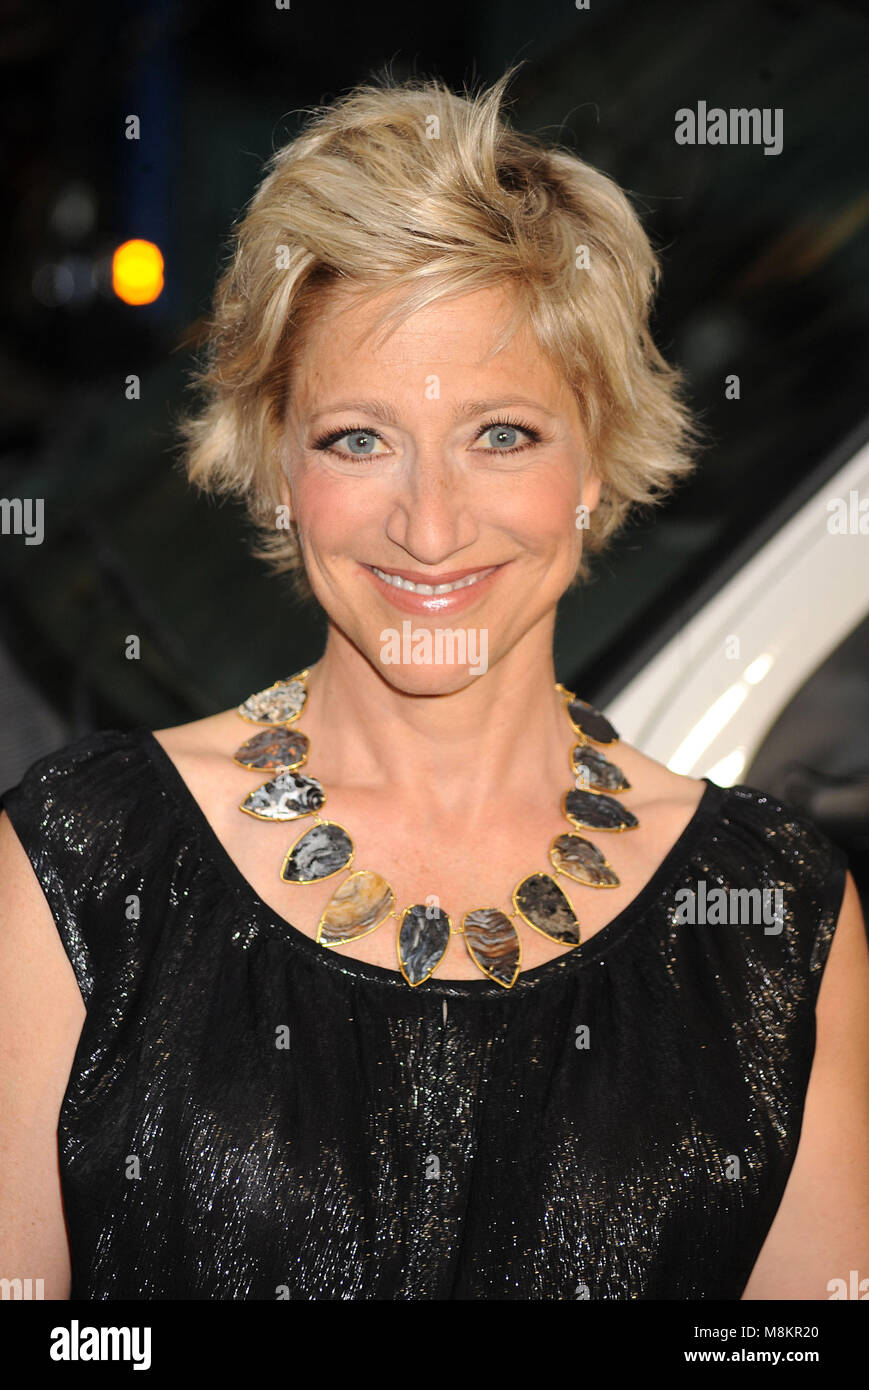 Edie Falco at the world premiere of Showtime's 'Nurse Jackie' at Directors Guild Theatre on June 2, 2009 in New York City Credit: Dennis Van Tine/MediaPunch Stock Photo